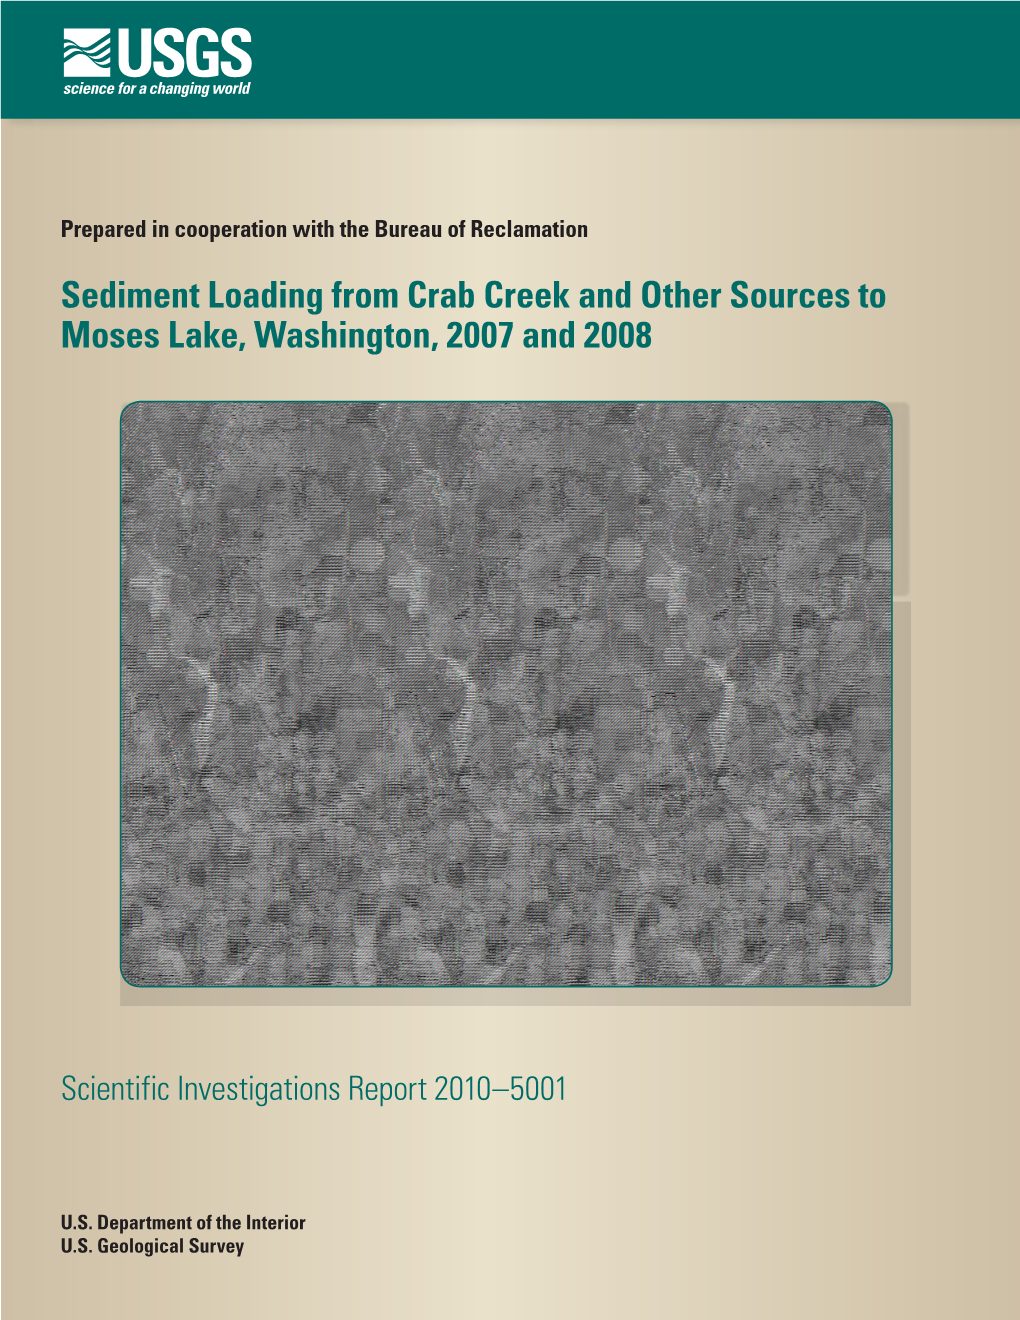 Sediment Loading from Crab Creek and Other Sources to Moses Lake, Washington, 2007 and 2008